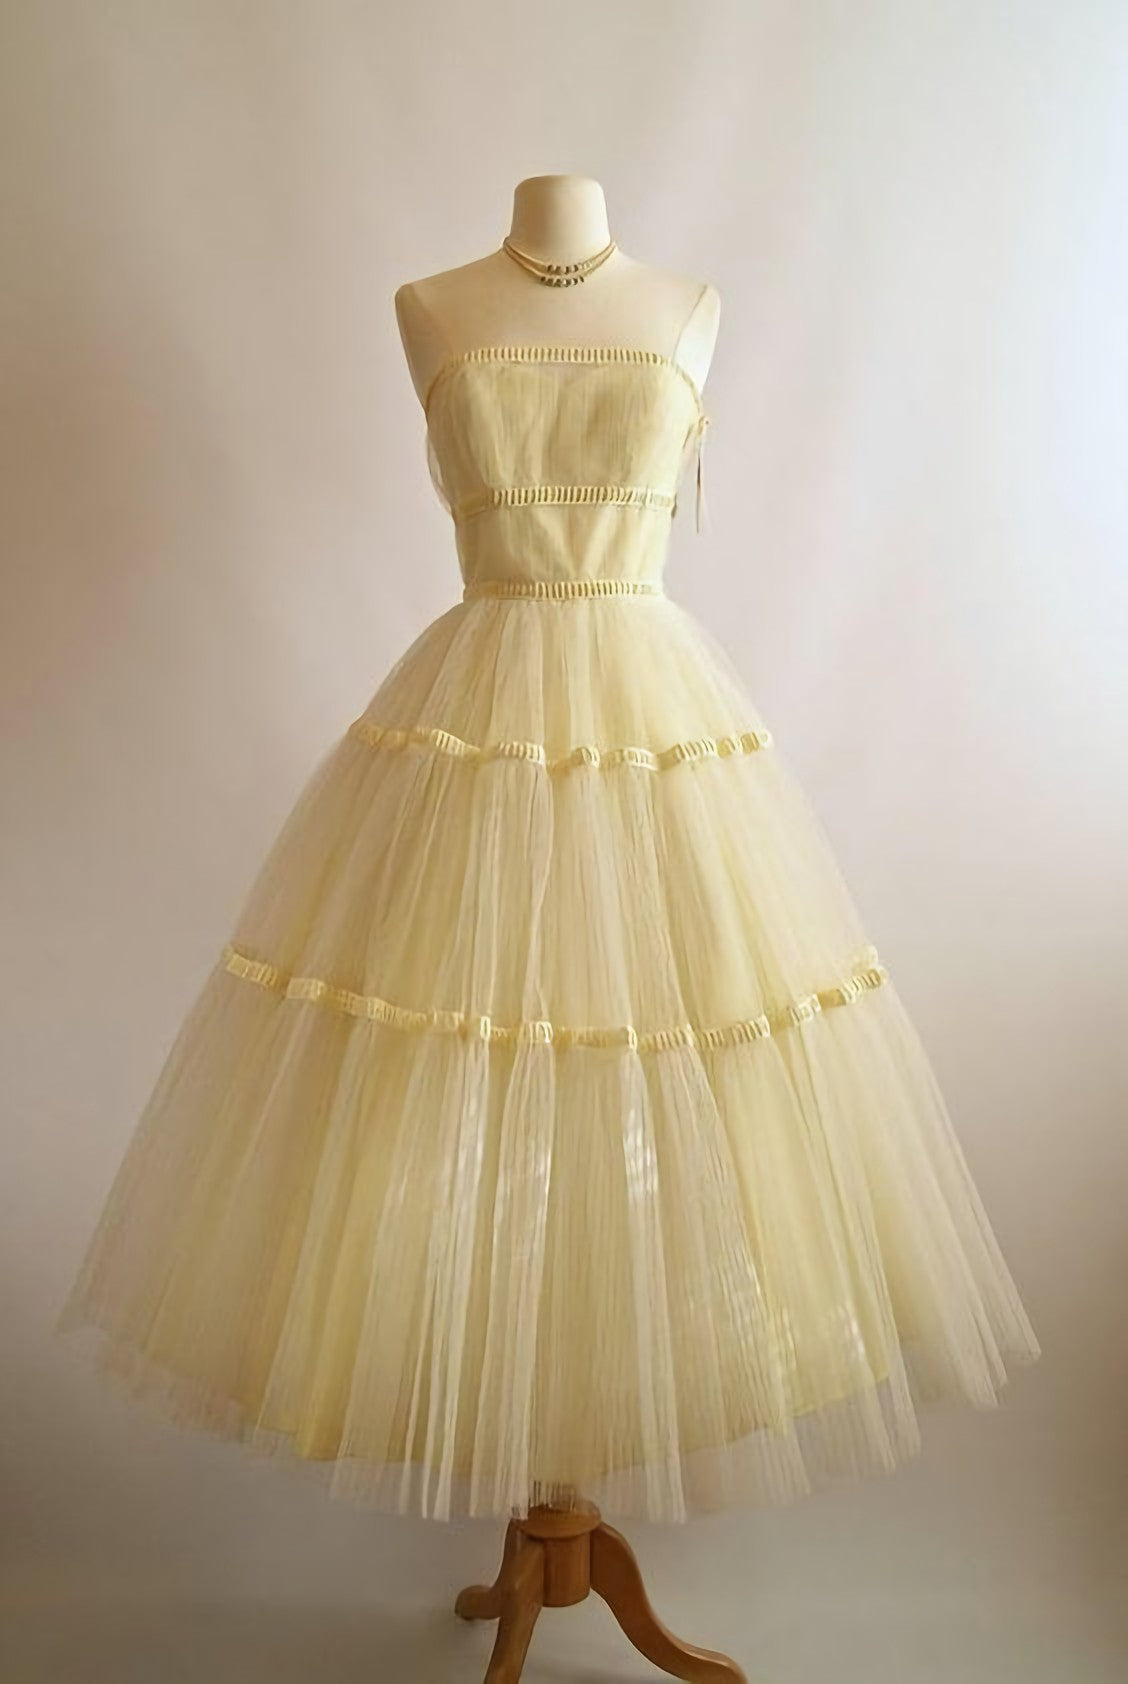 Prom Dresses Aesthetic, Vintage Yellow Dress, Homecoming Dress